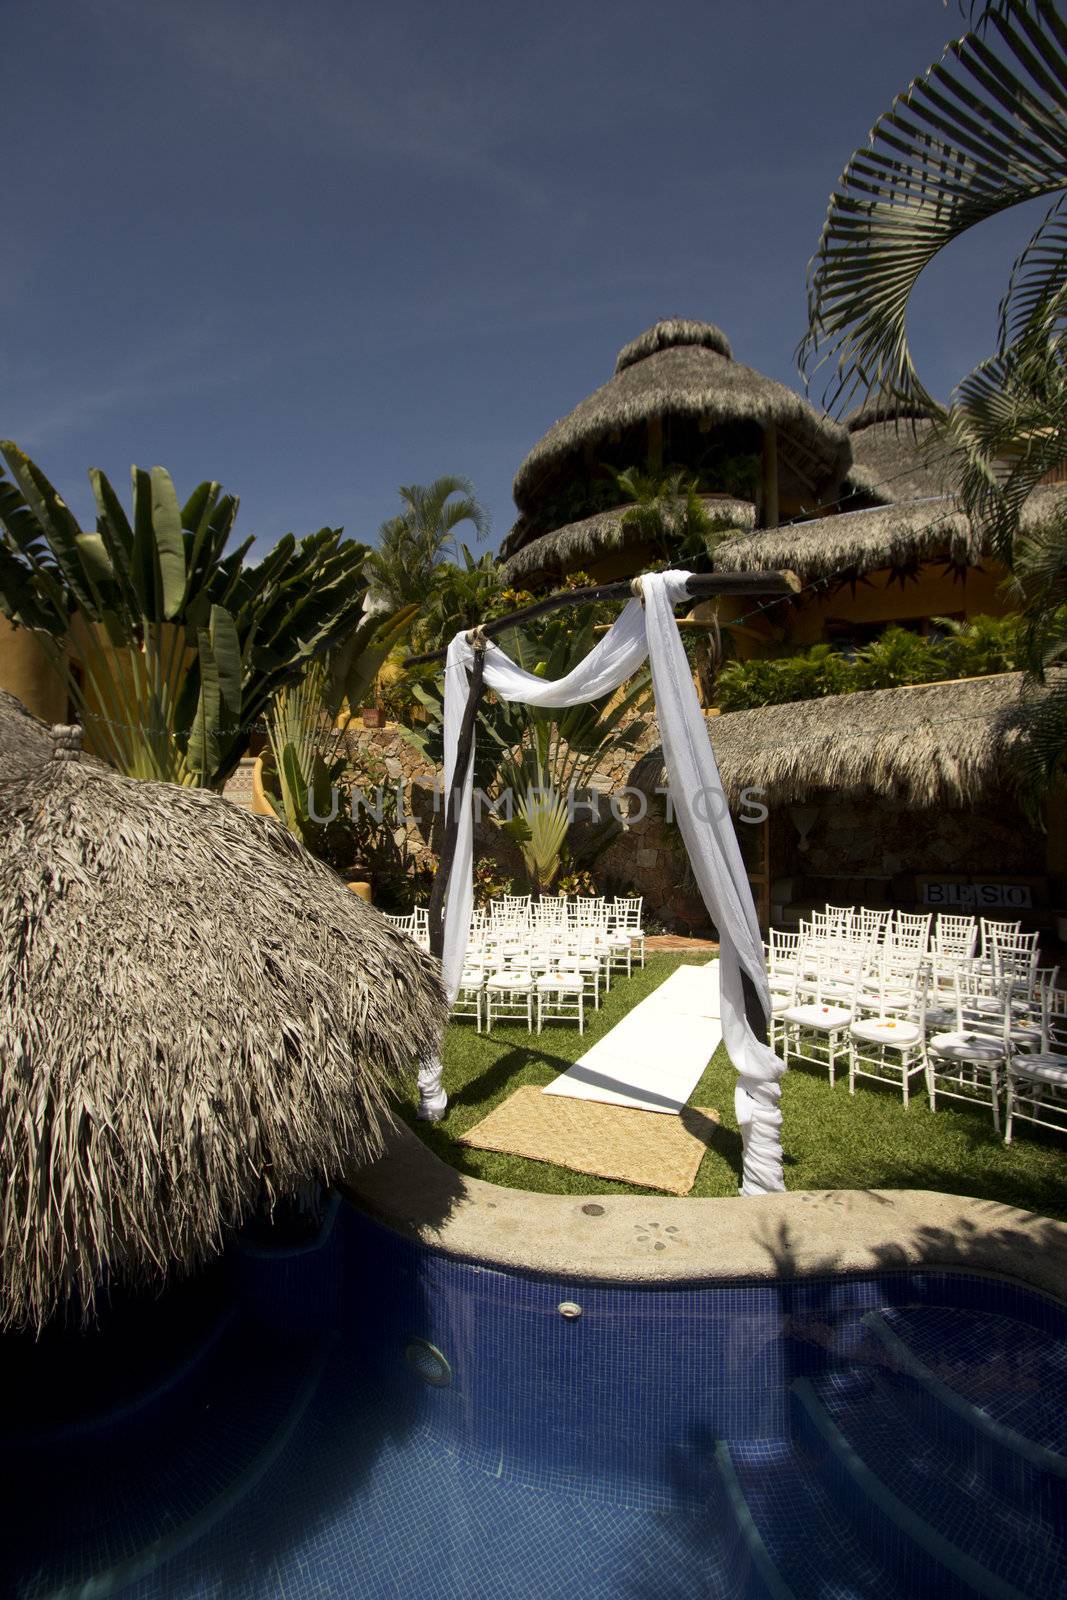 Tropical wedding in a Mexican villa next to the beach by jeremywhat